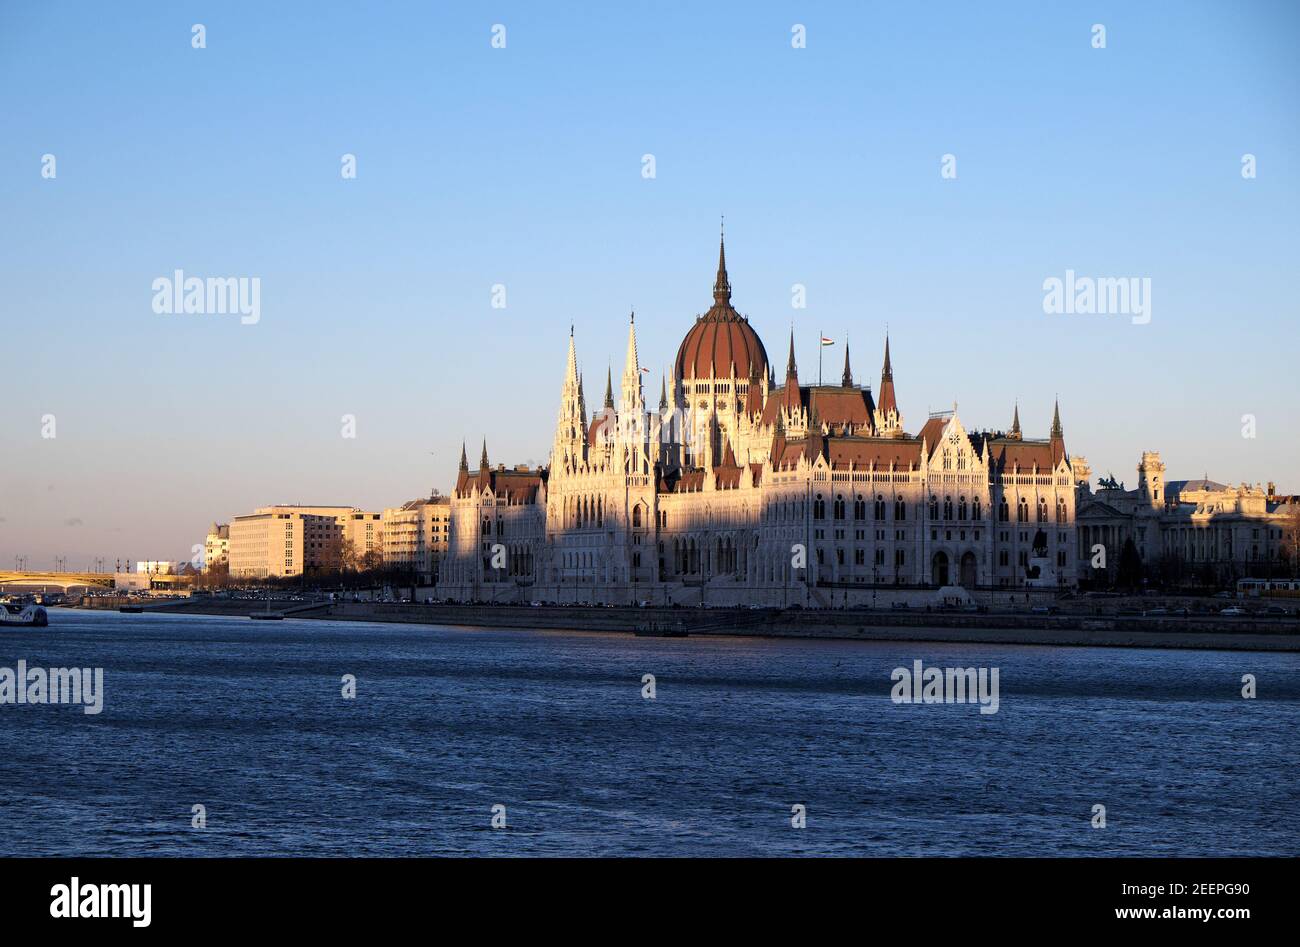 Parlament Building, seen over the River Duna (Danube), Budapest, Hungary. Stock Photo